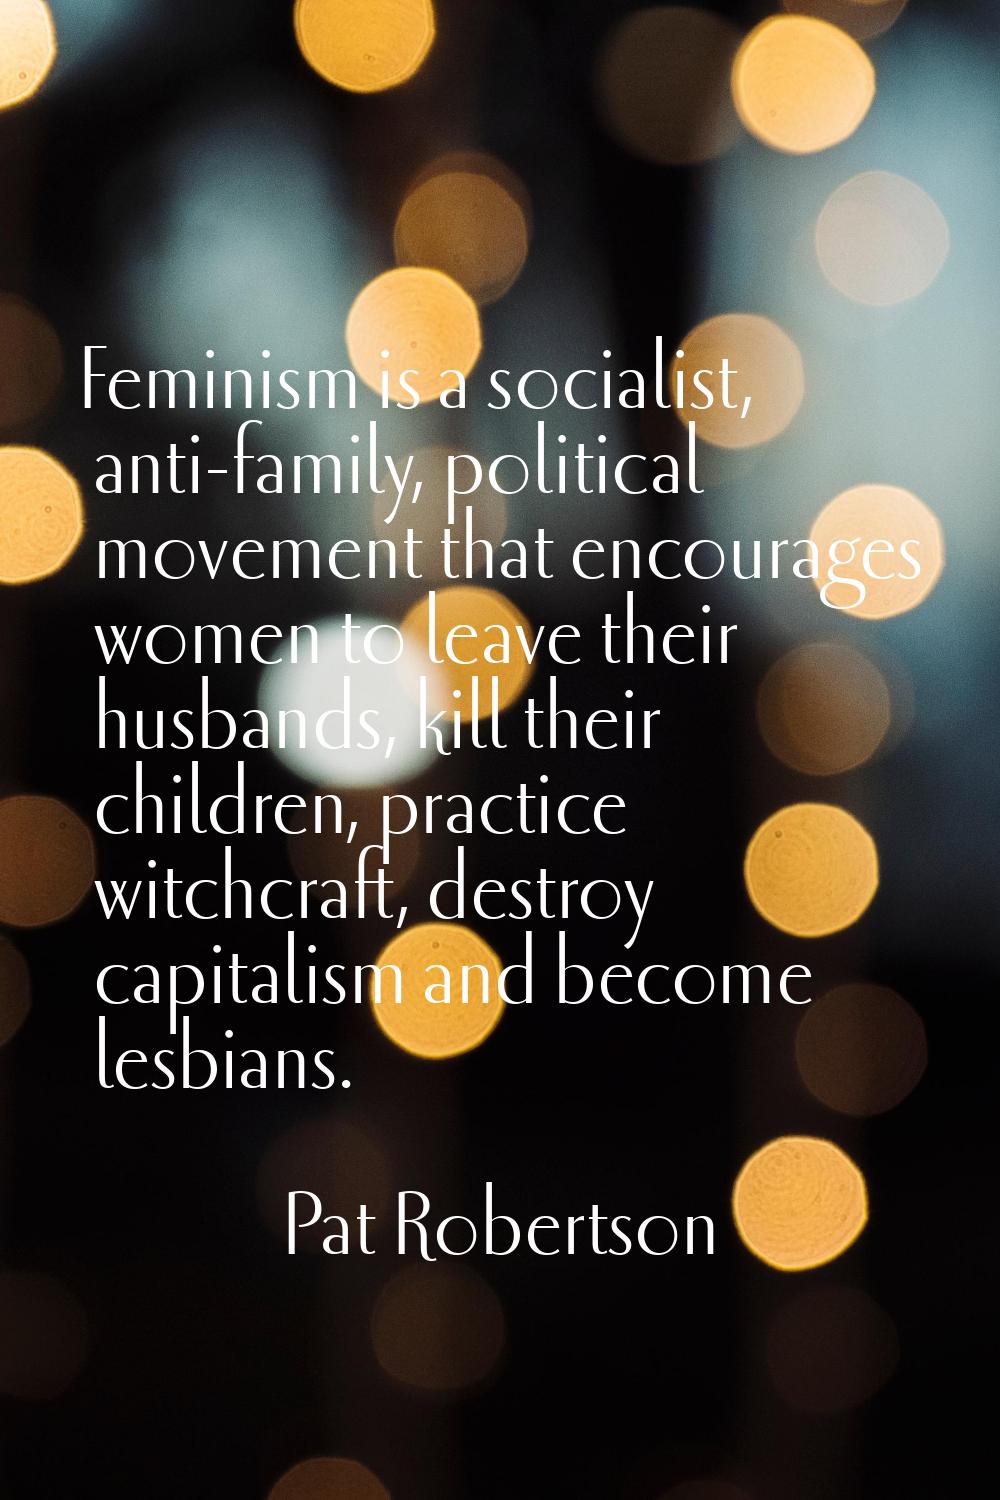 Feminism is a socialist, anti-family, political movement that encourages women to leave their husba